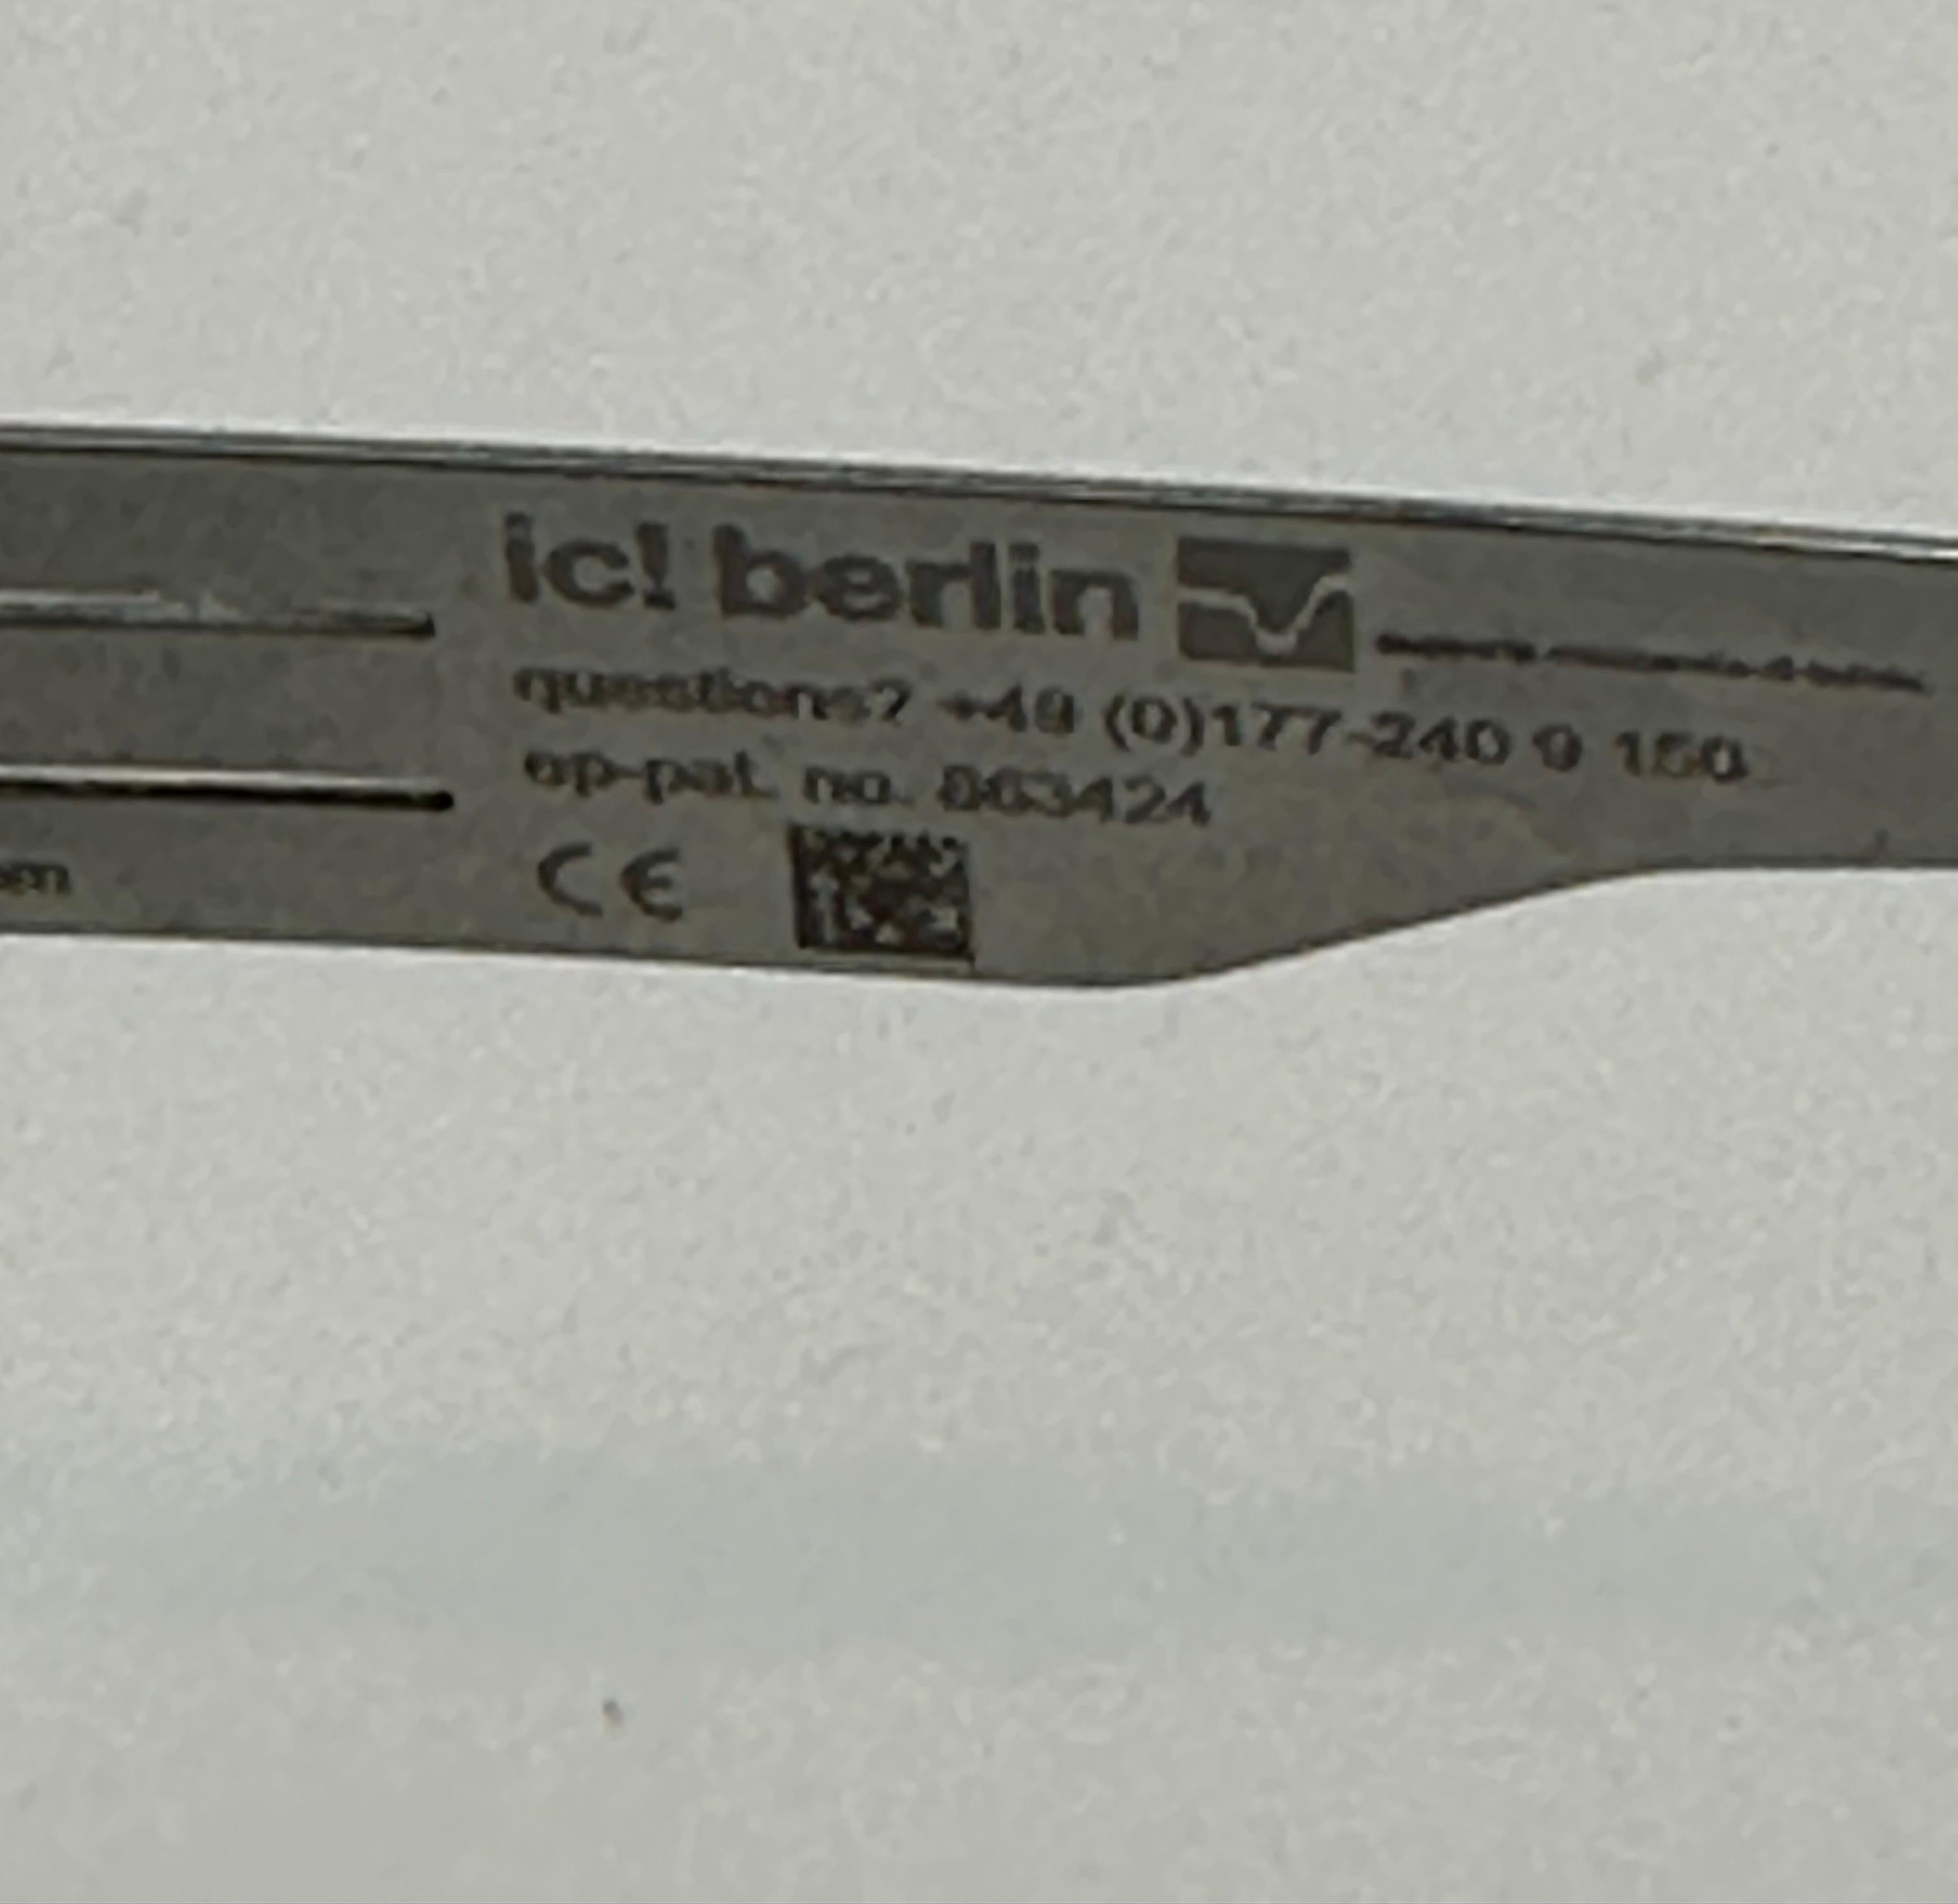 Ic! Berlin 'Limited Edition' Cream & Stainless Steel 'Spring Back' Arms Sunglass For Sale 1